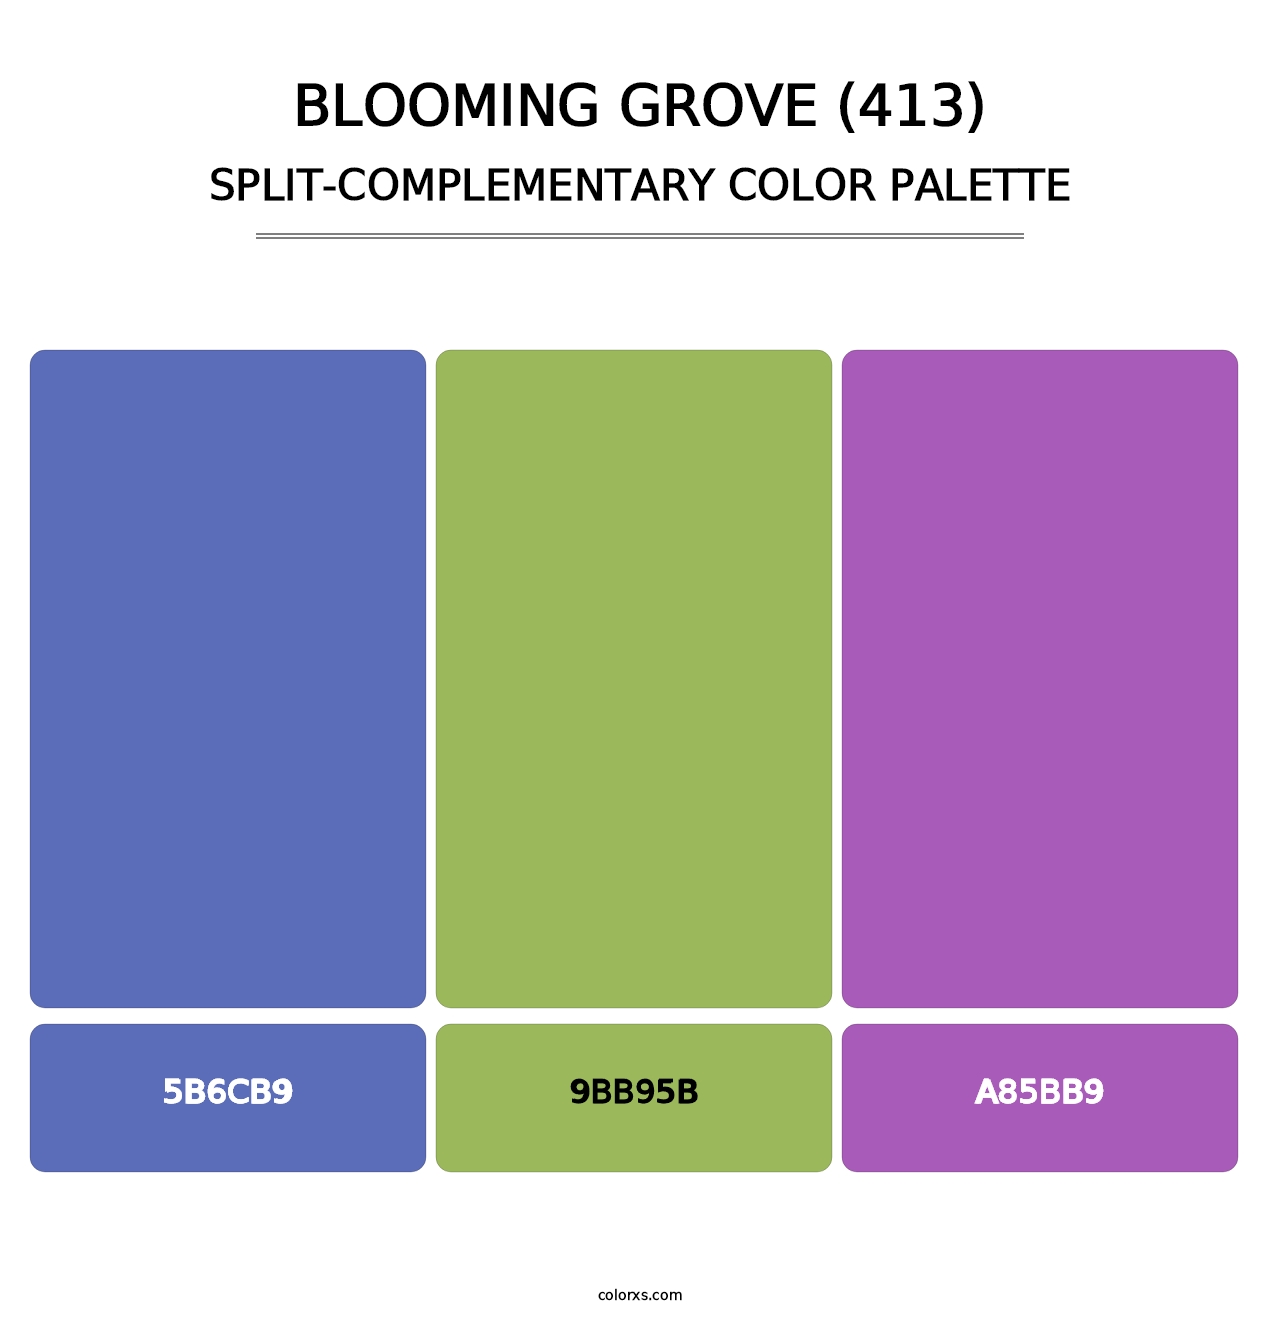 Blooming Grove (413) - Split-Complementary Color Palette